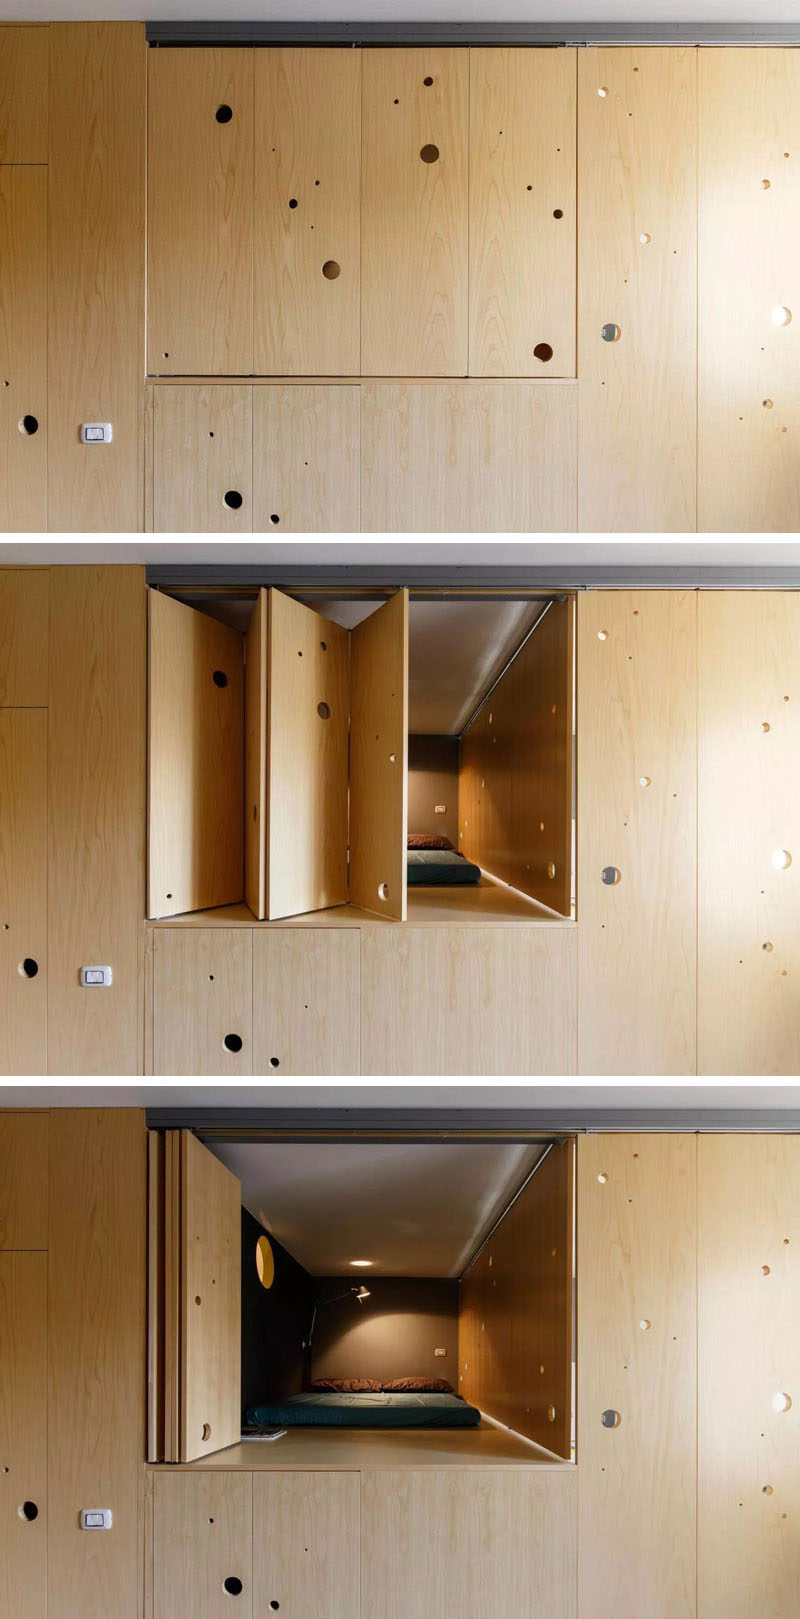 This wooden wall opens up to reveal a lofted bed in this tiny apartment.